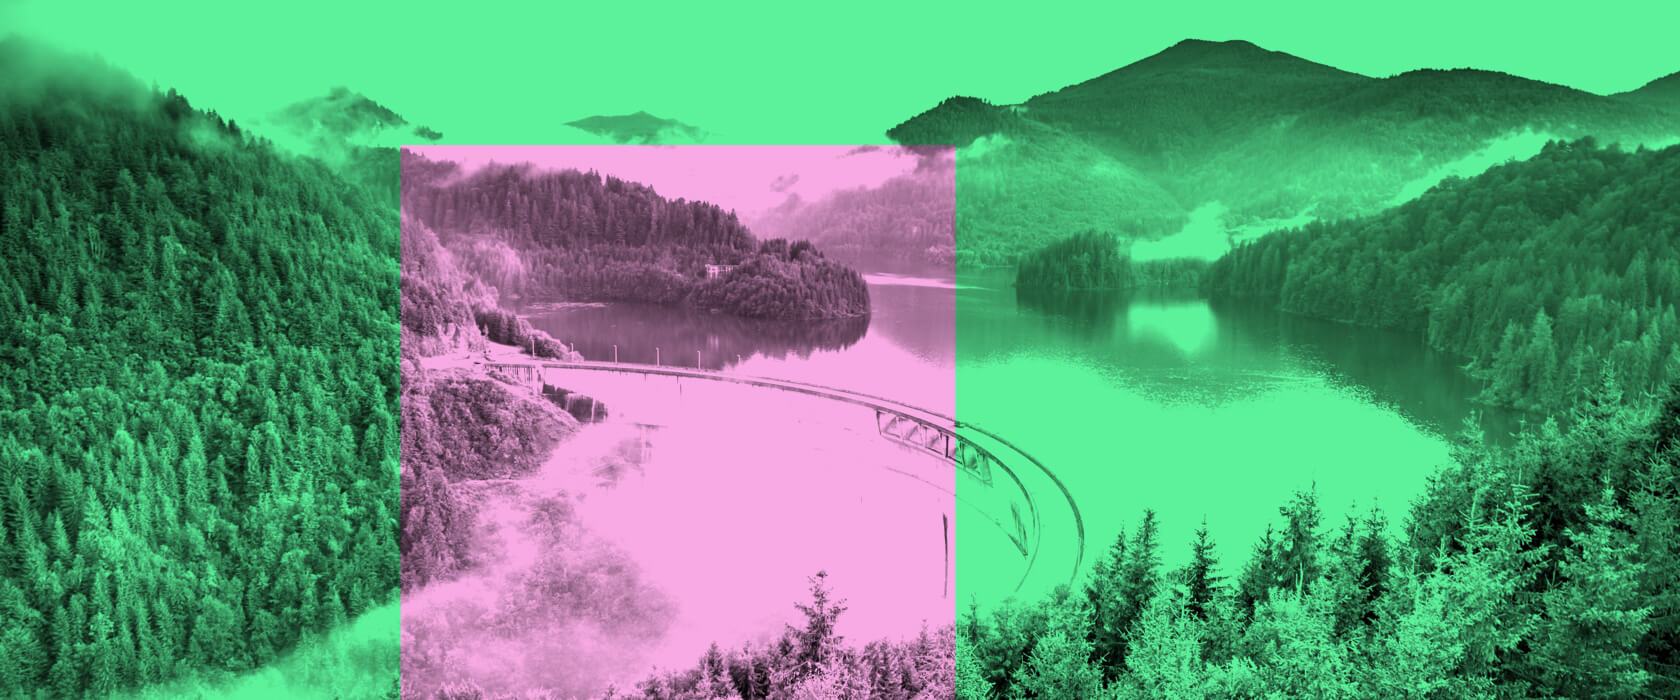 A photo of a reservoir in Romania processed with color overlays